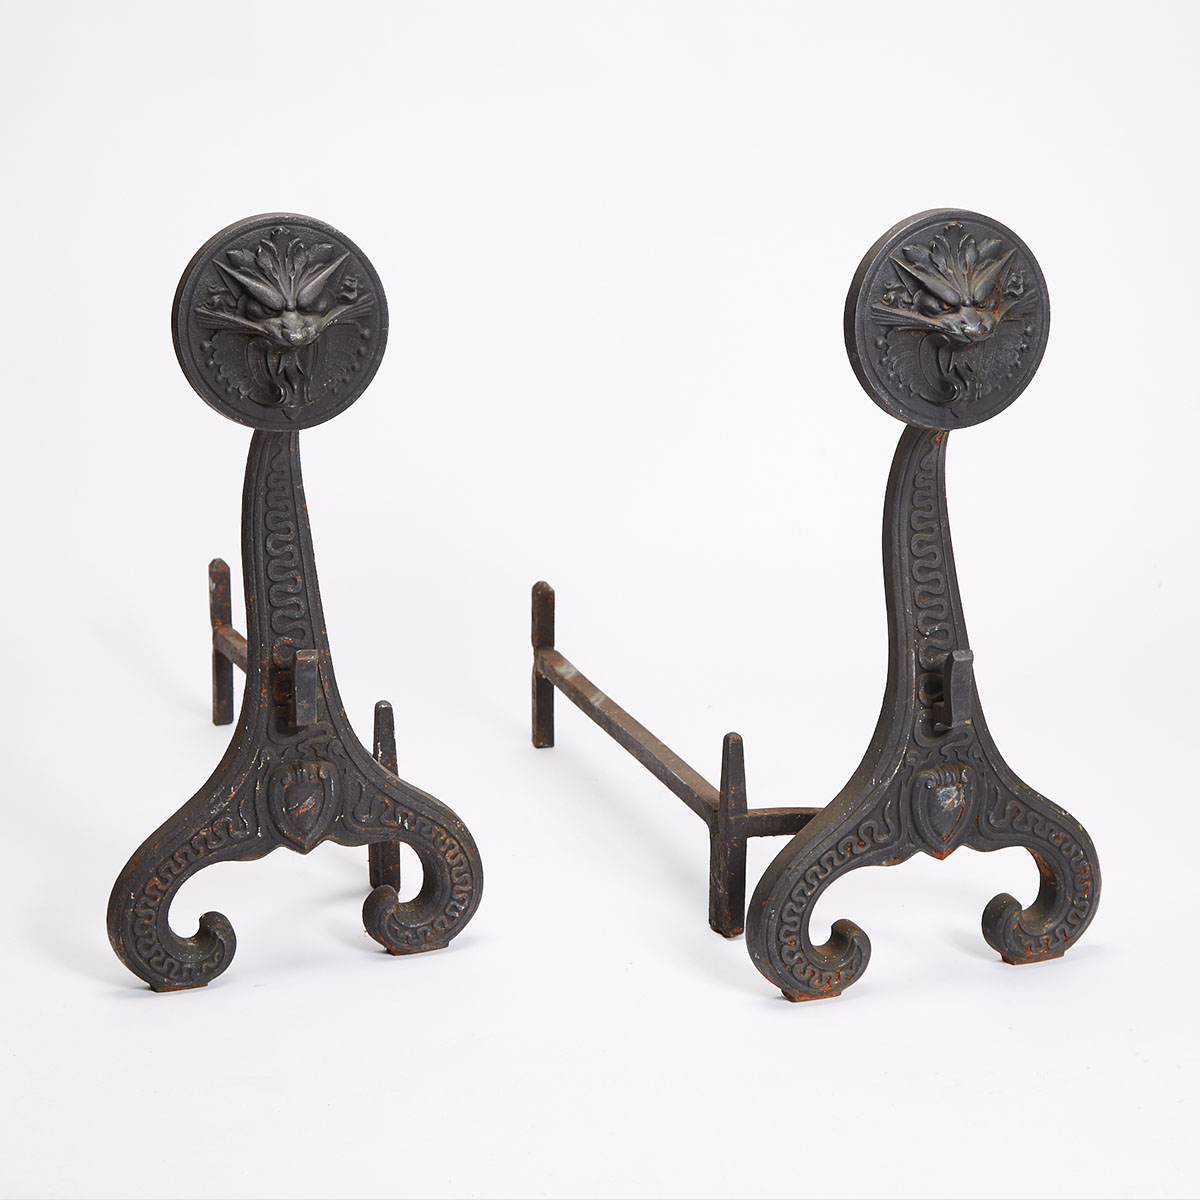 Pair of Bradley and Hubbard Cast Iron Firedogs, 19th/20th century